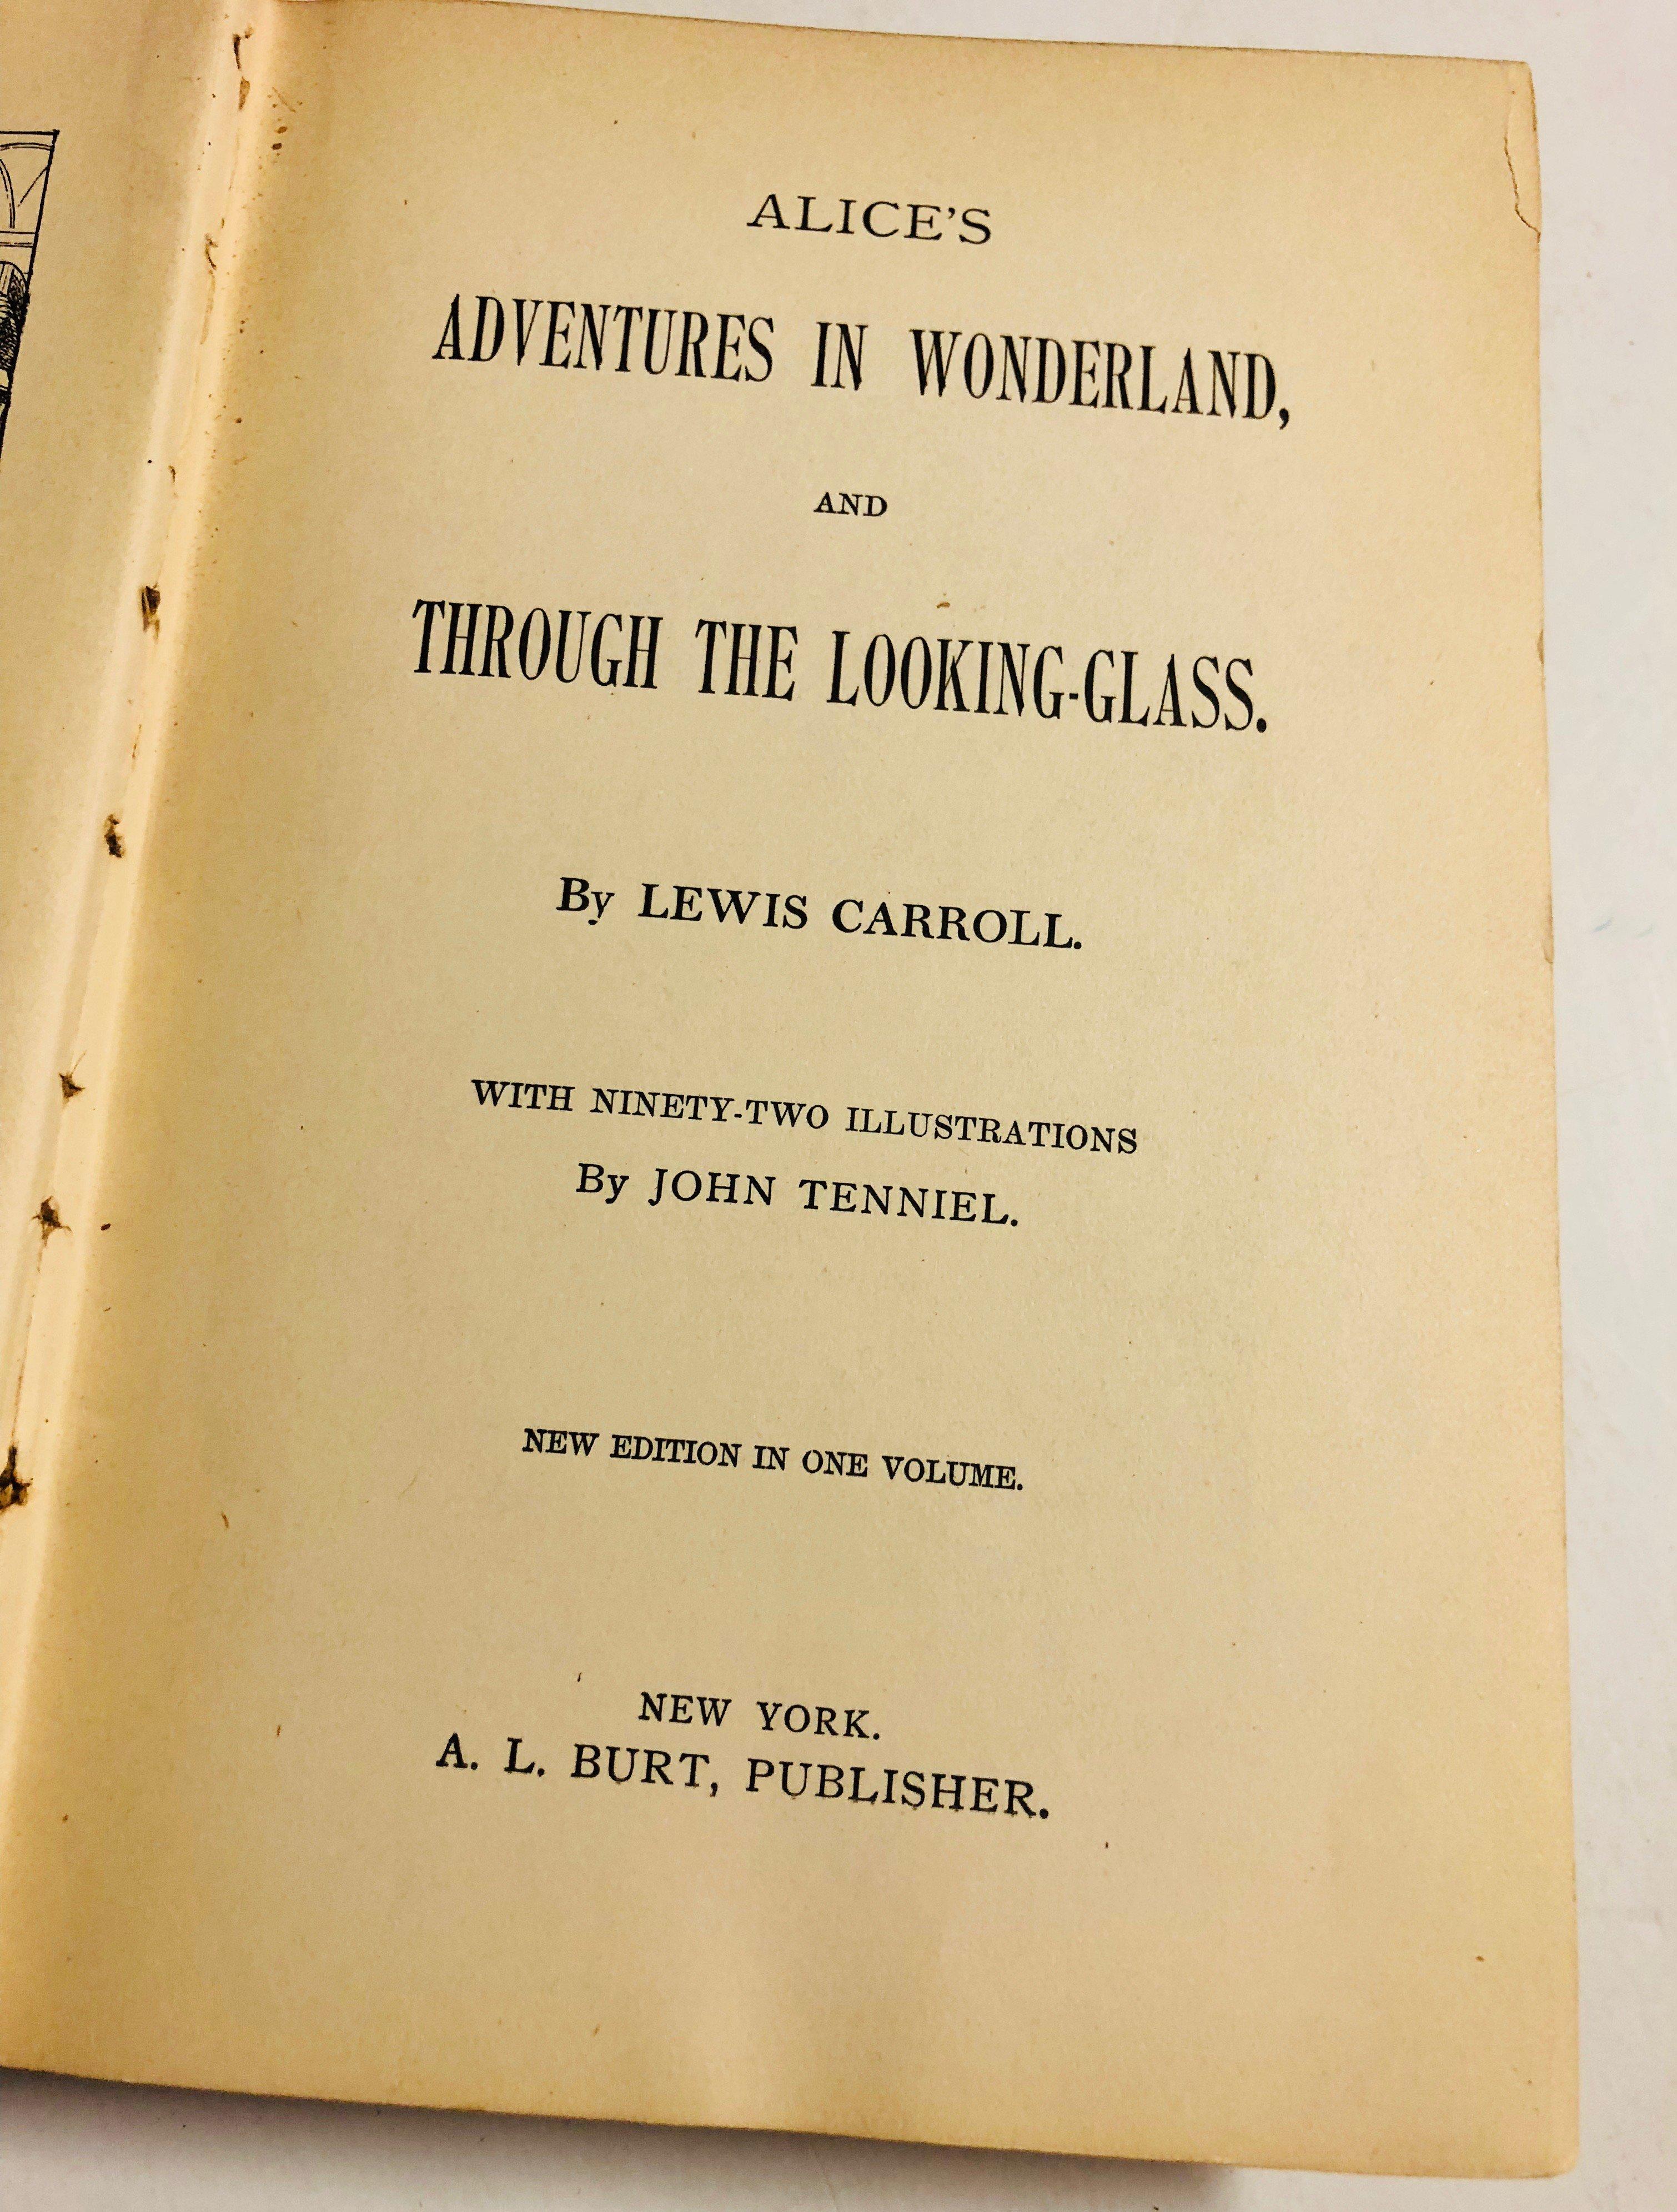 Alice's Adventure in Wonderland and Through the Looking-Glass (c.1890)